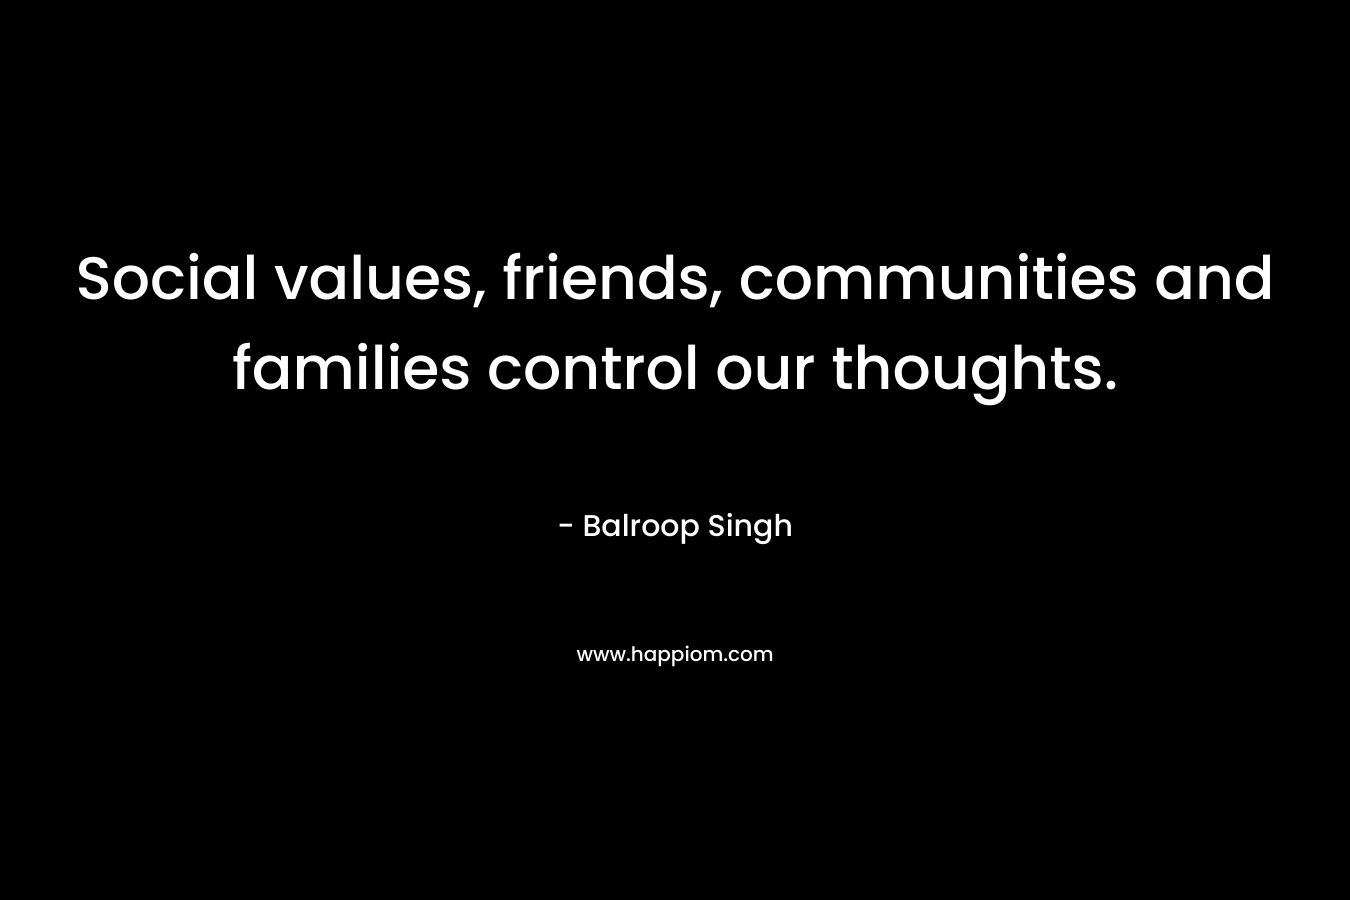 Social values, friends, communities and families control our thoughts.